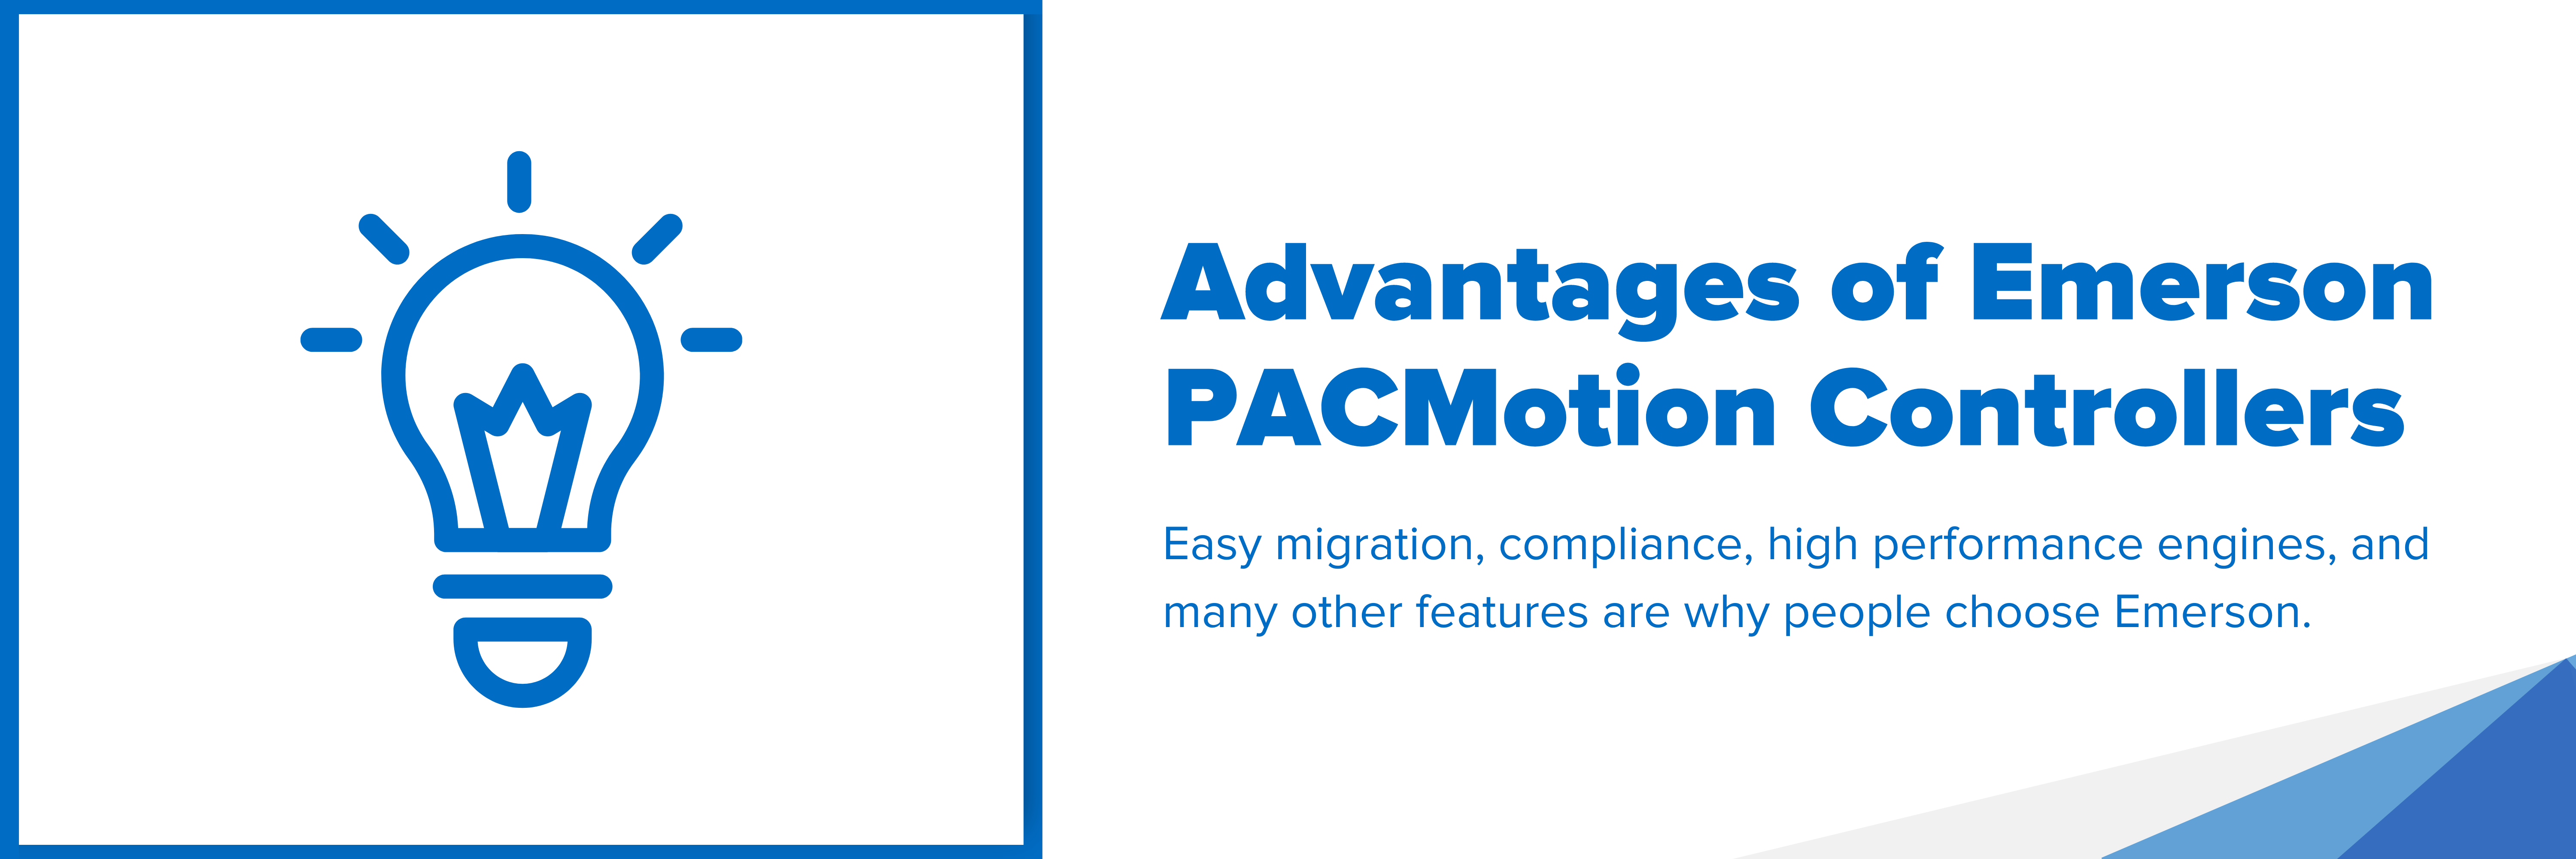 Header image with text "Advantages of Emerson PACMotion Controllers"